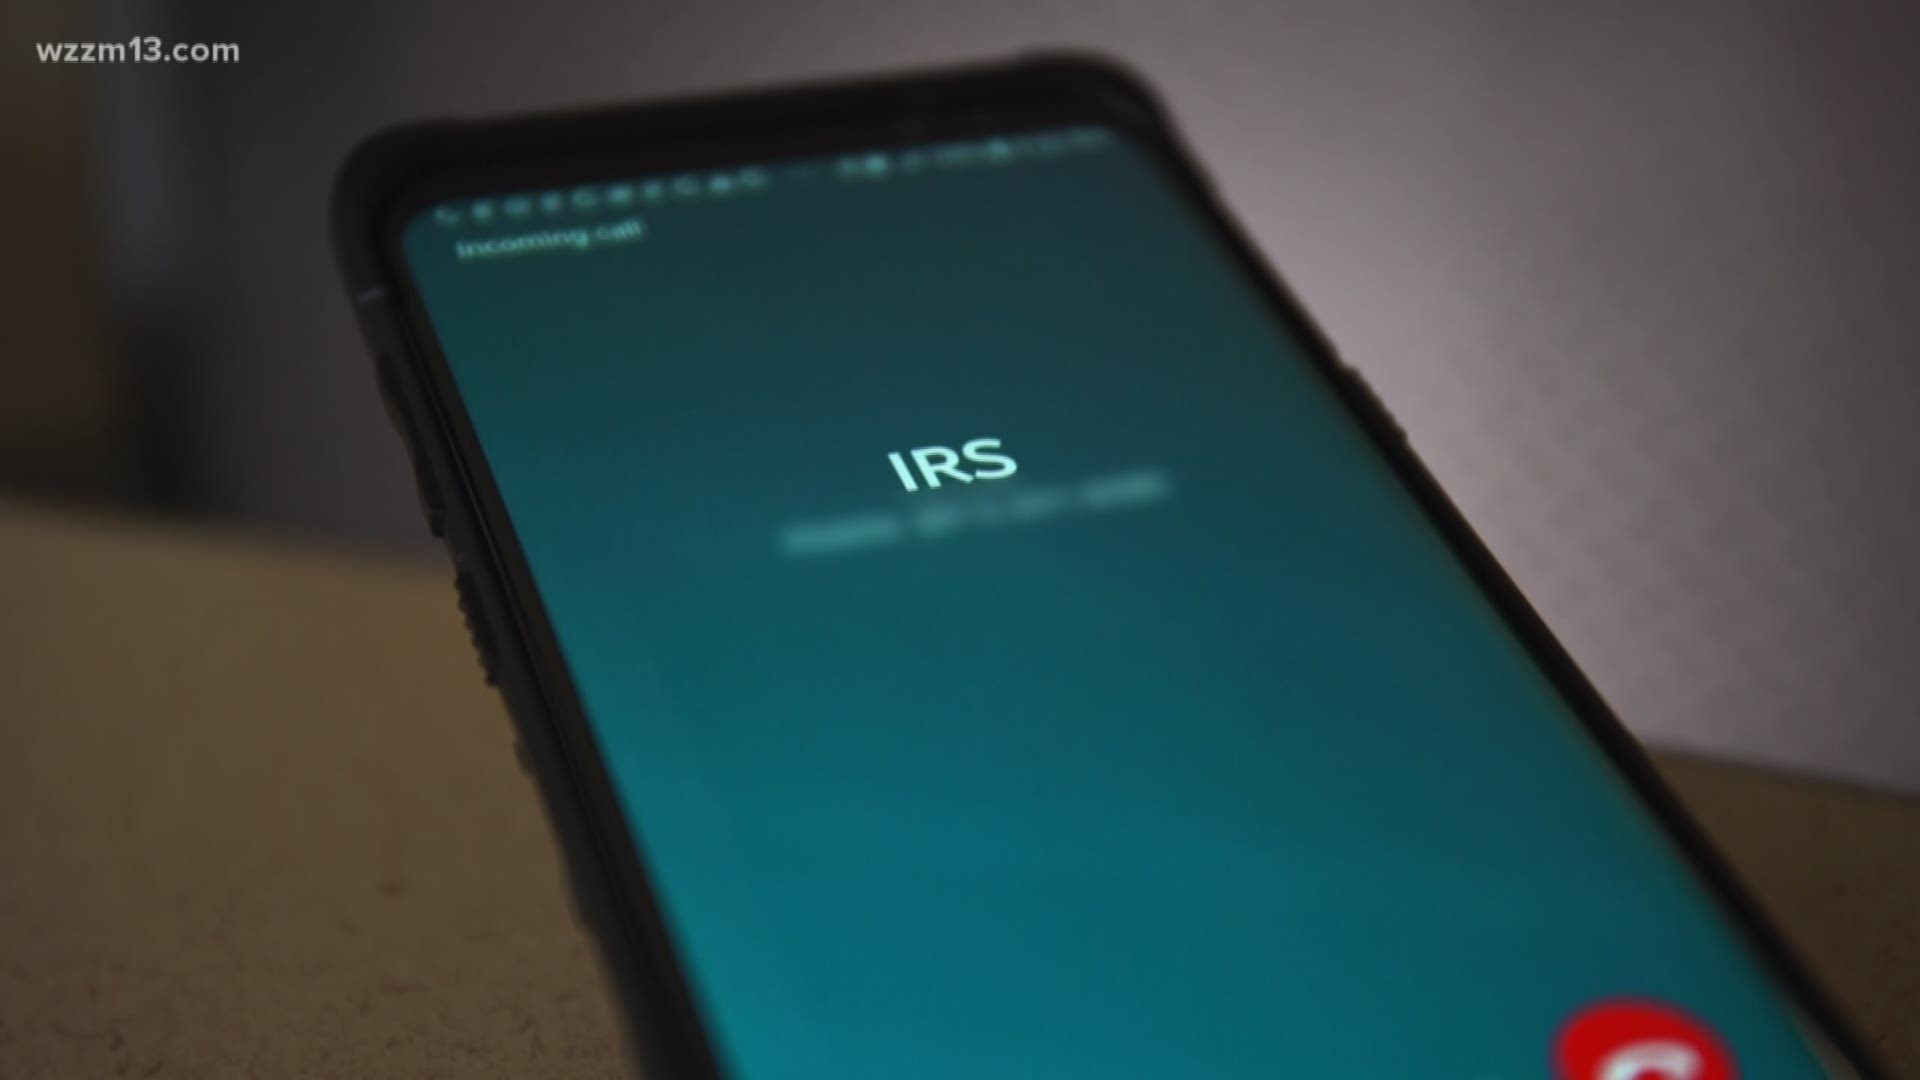 IRS Scam continues to find victims